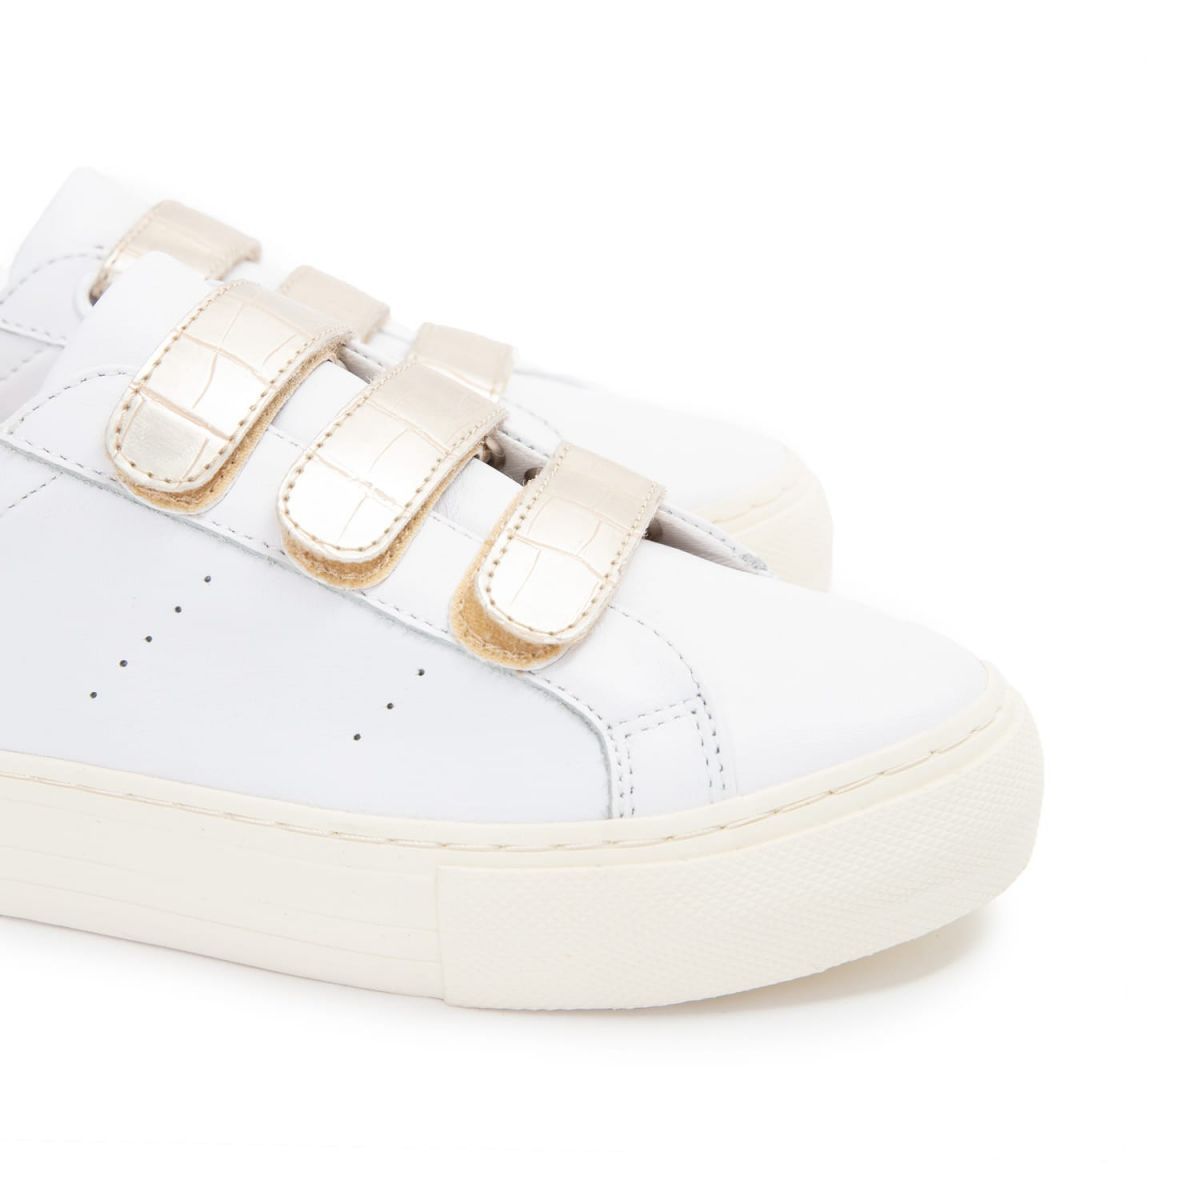 Arcade Straps White Gold Sneakers KNGDSC0474 - 5